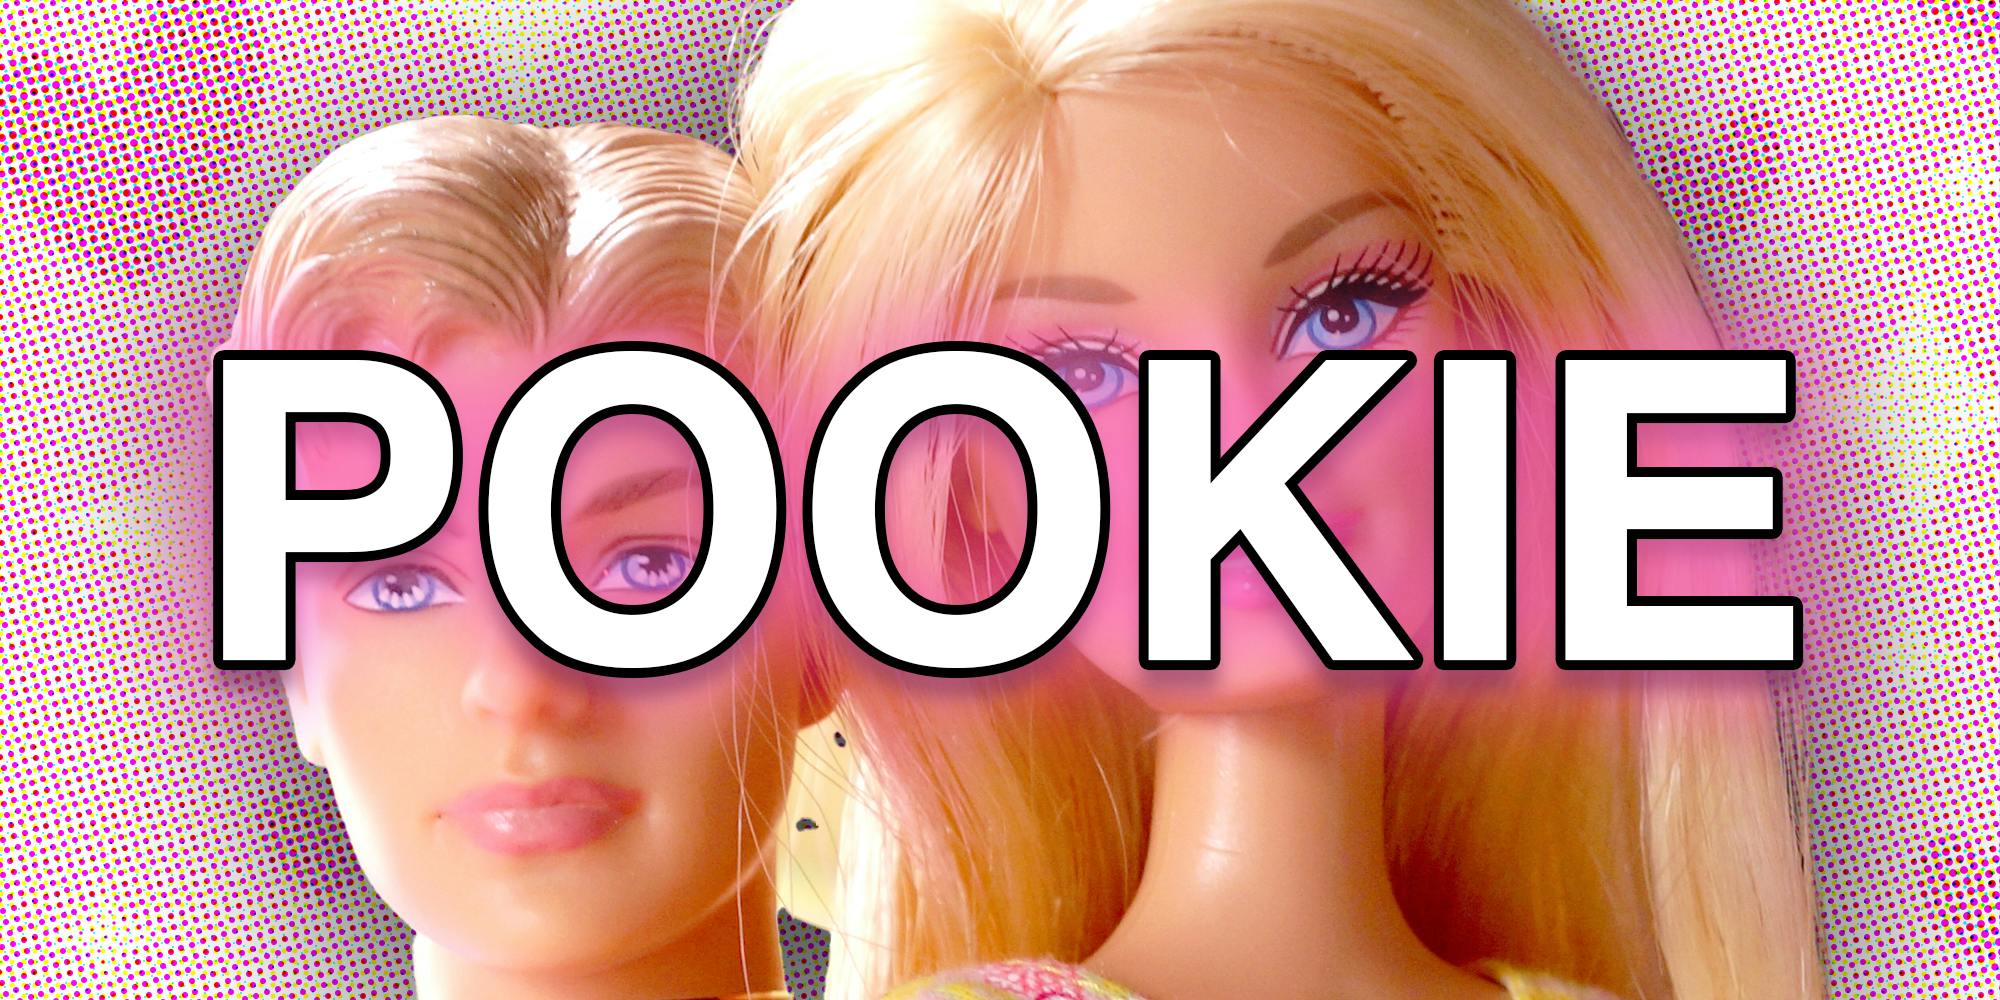 Barbie and ken with the word "pookie" over them